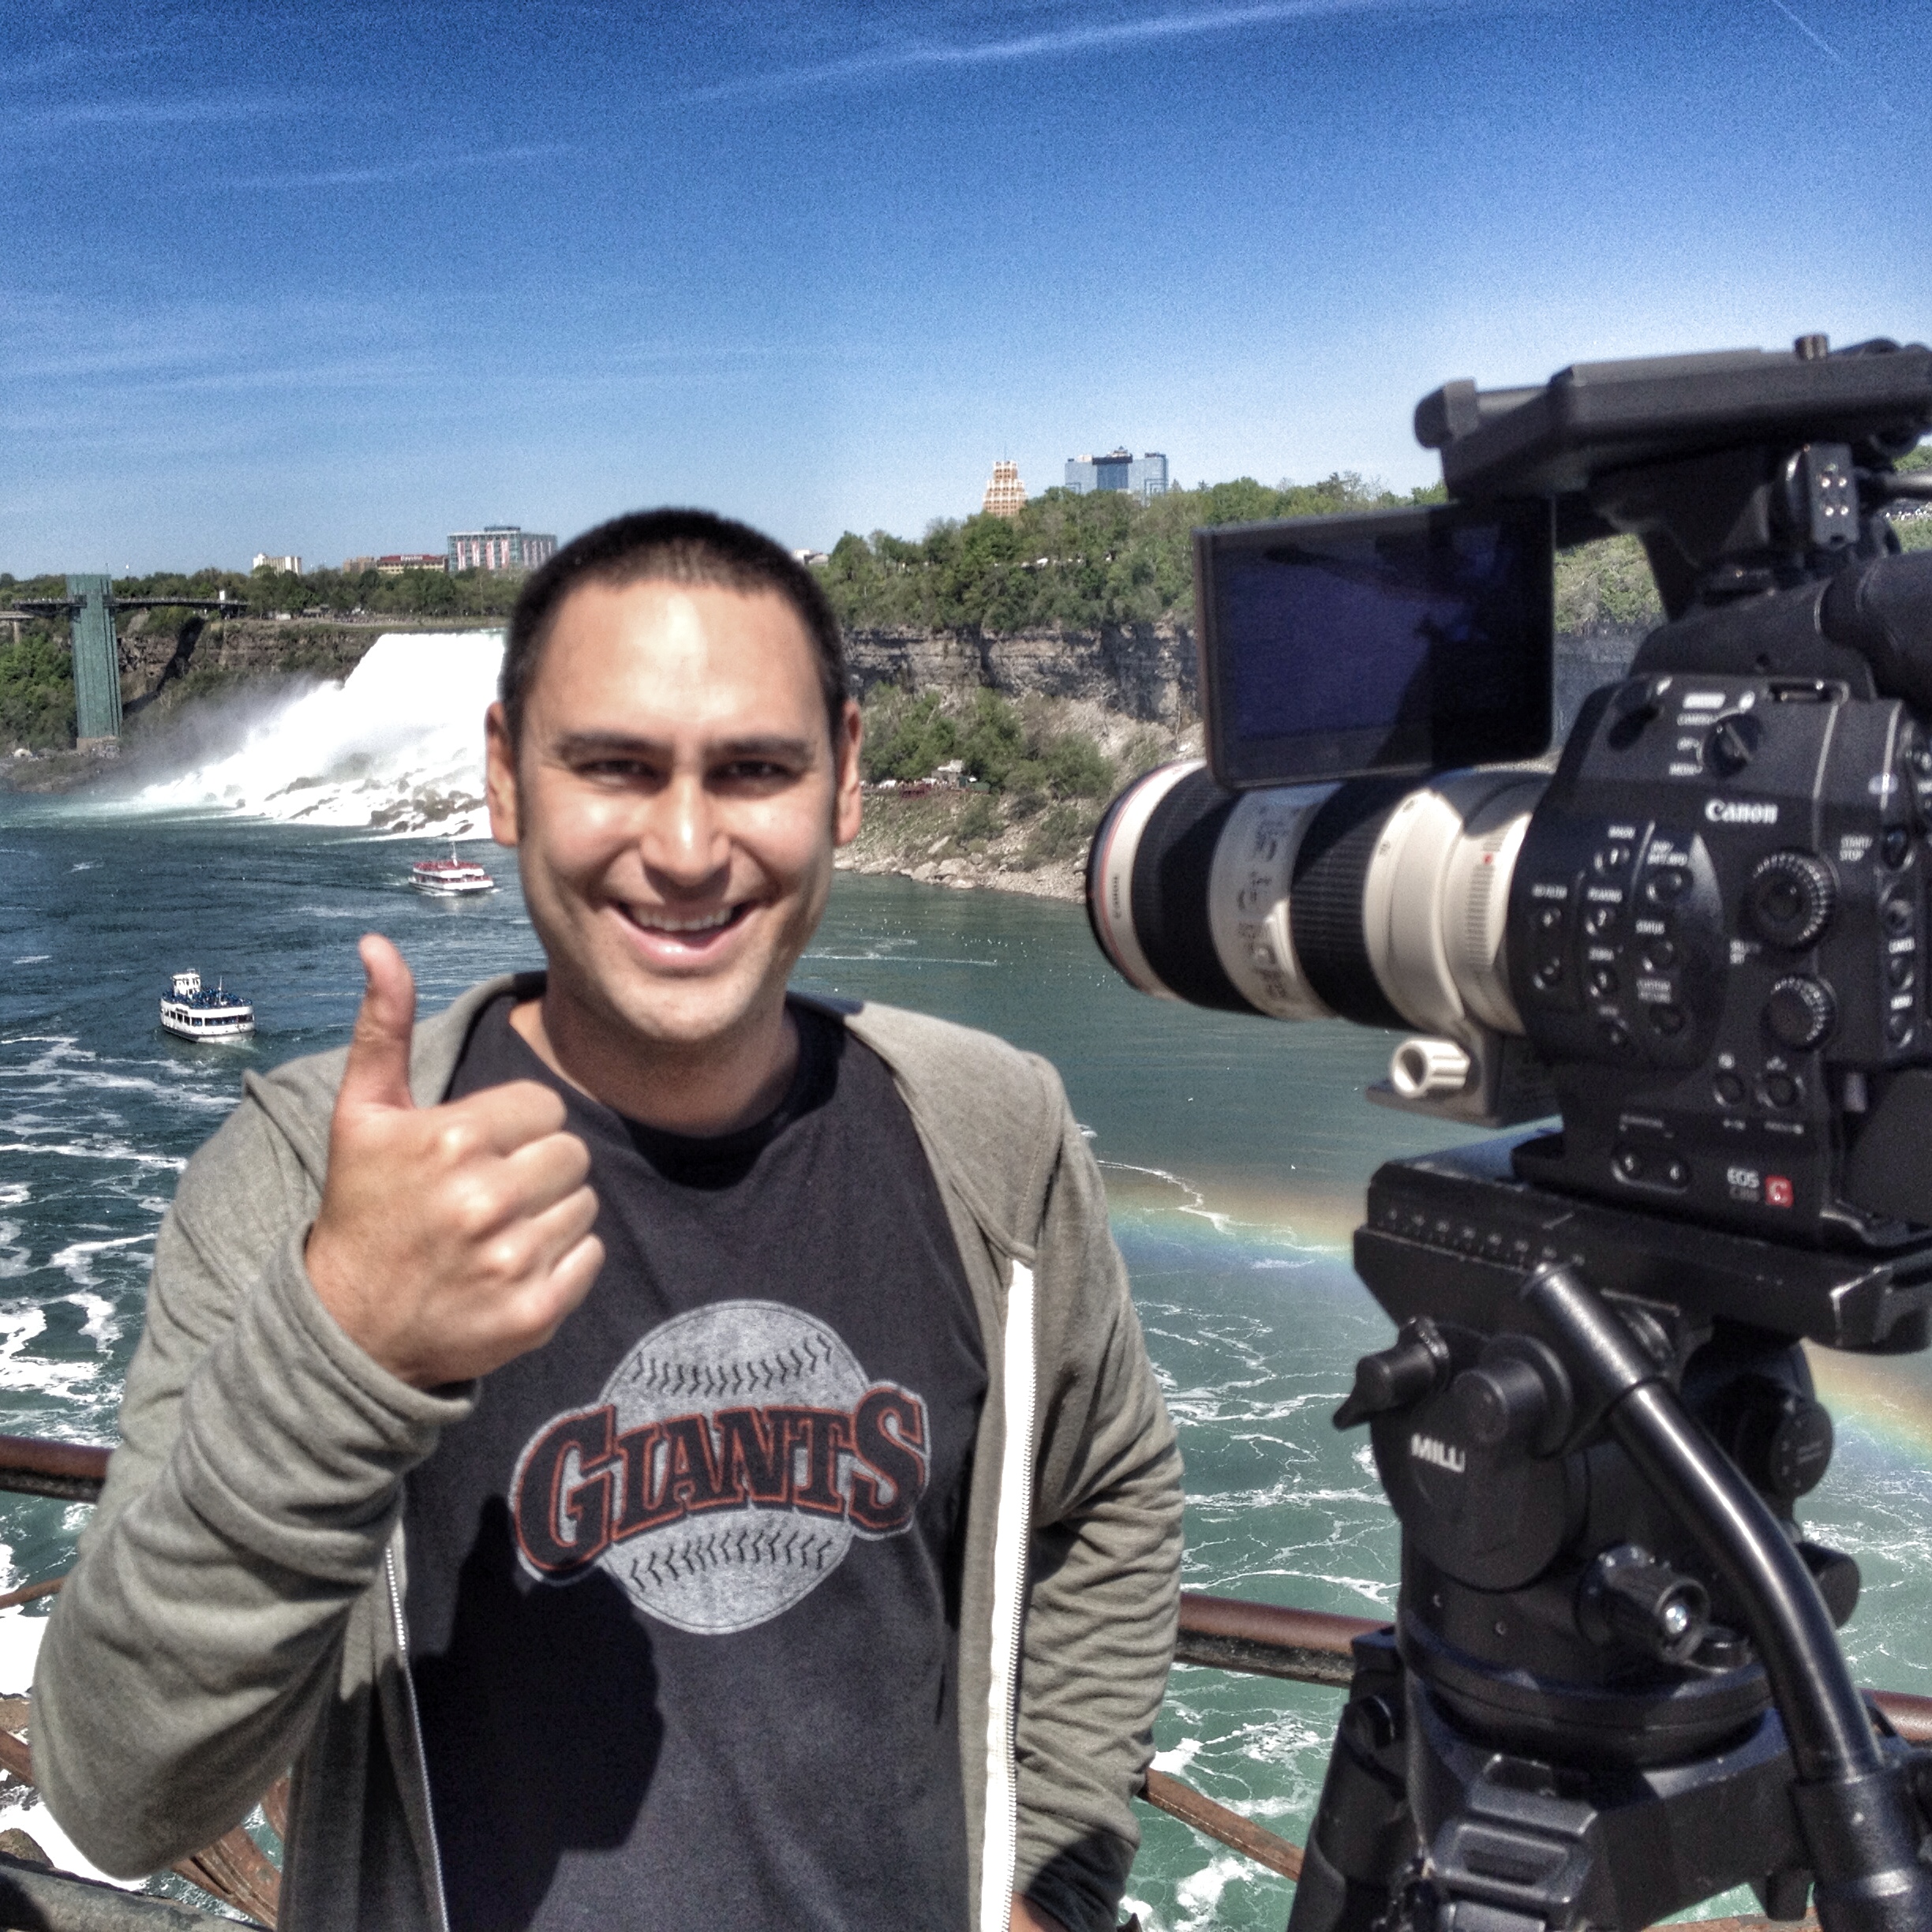  Jason at Niagra Falls just before re-entering the United States. 